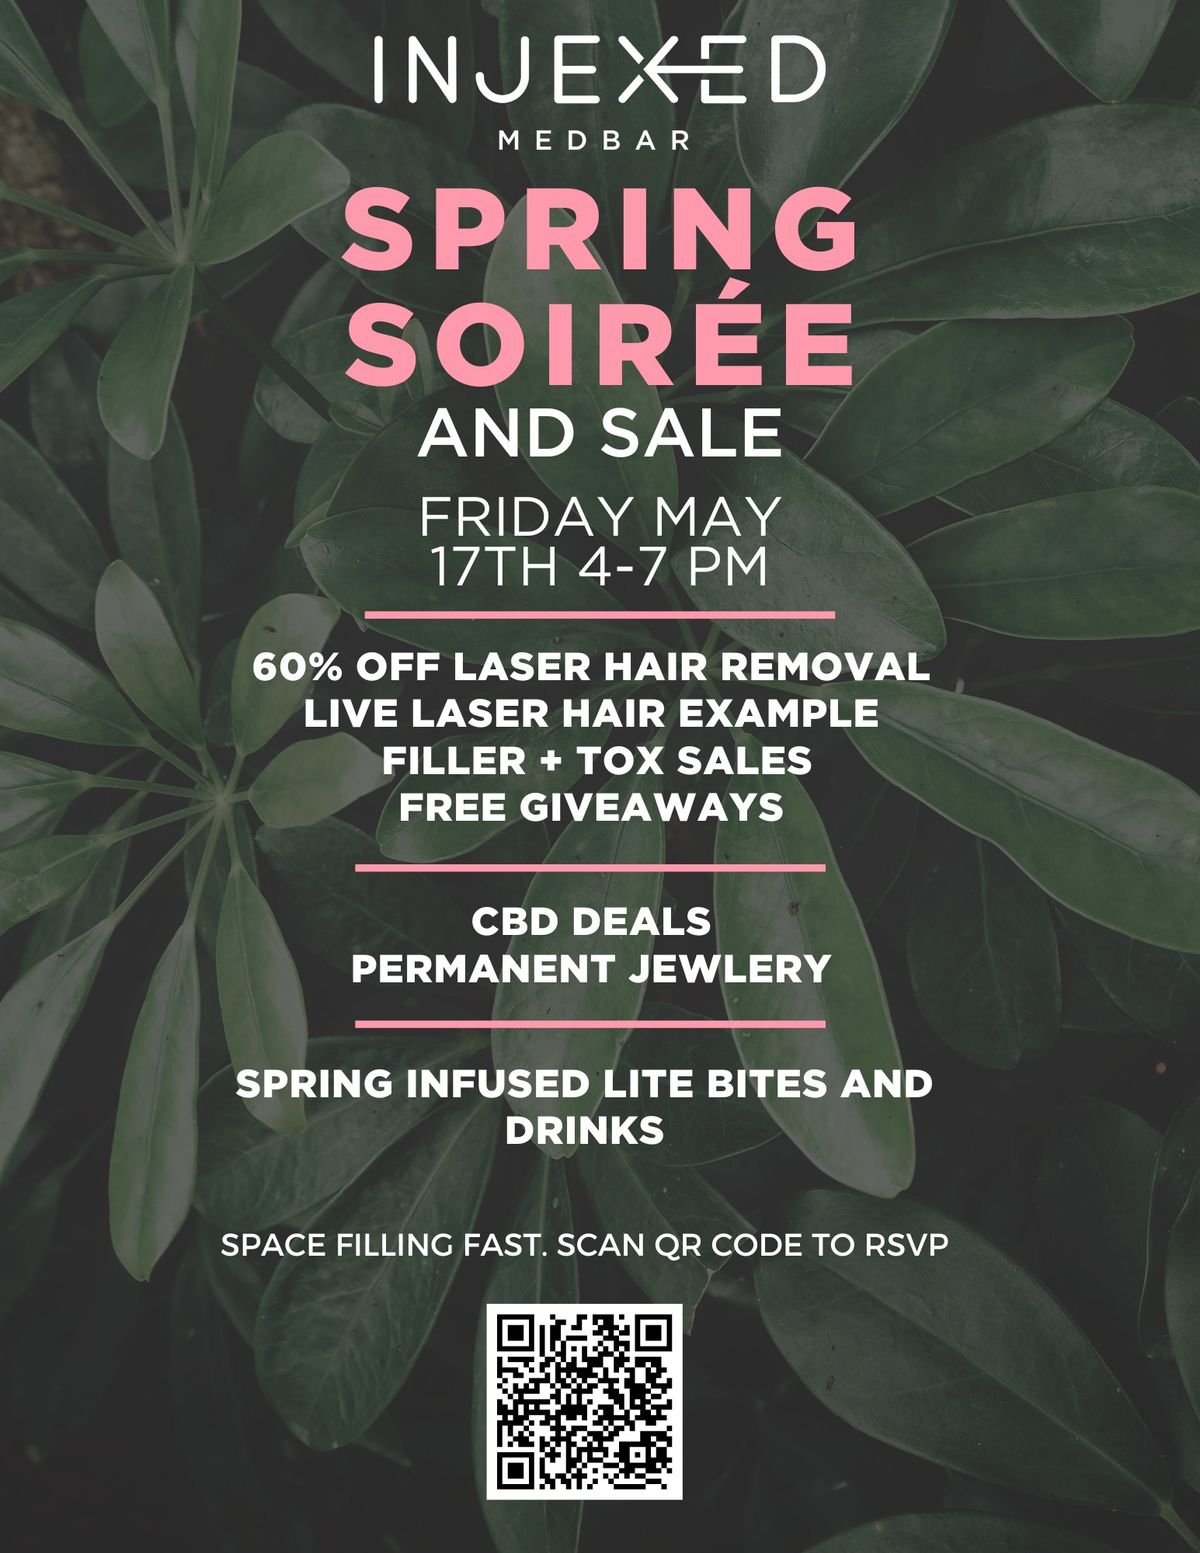 INJEXED SPRING SOIREE and SALE